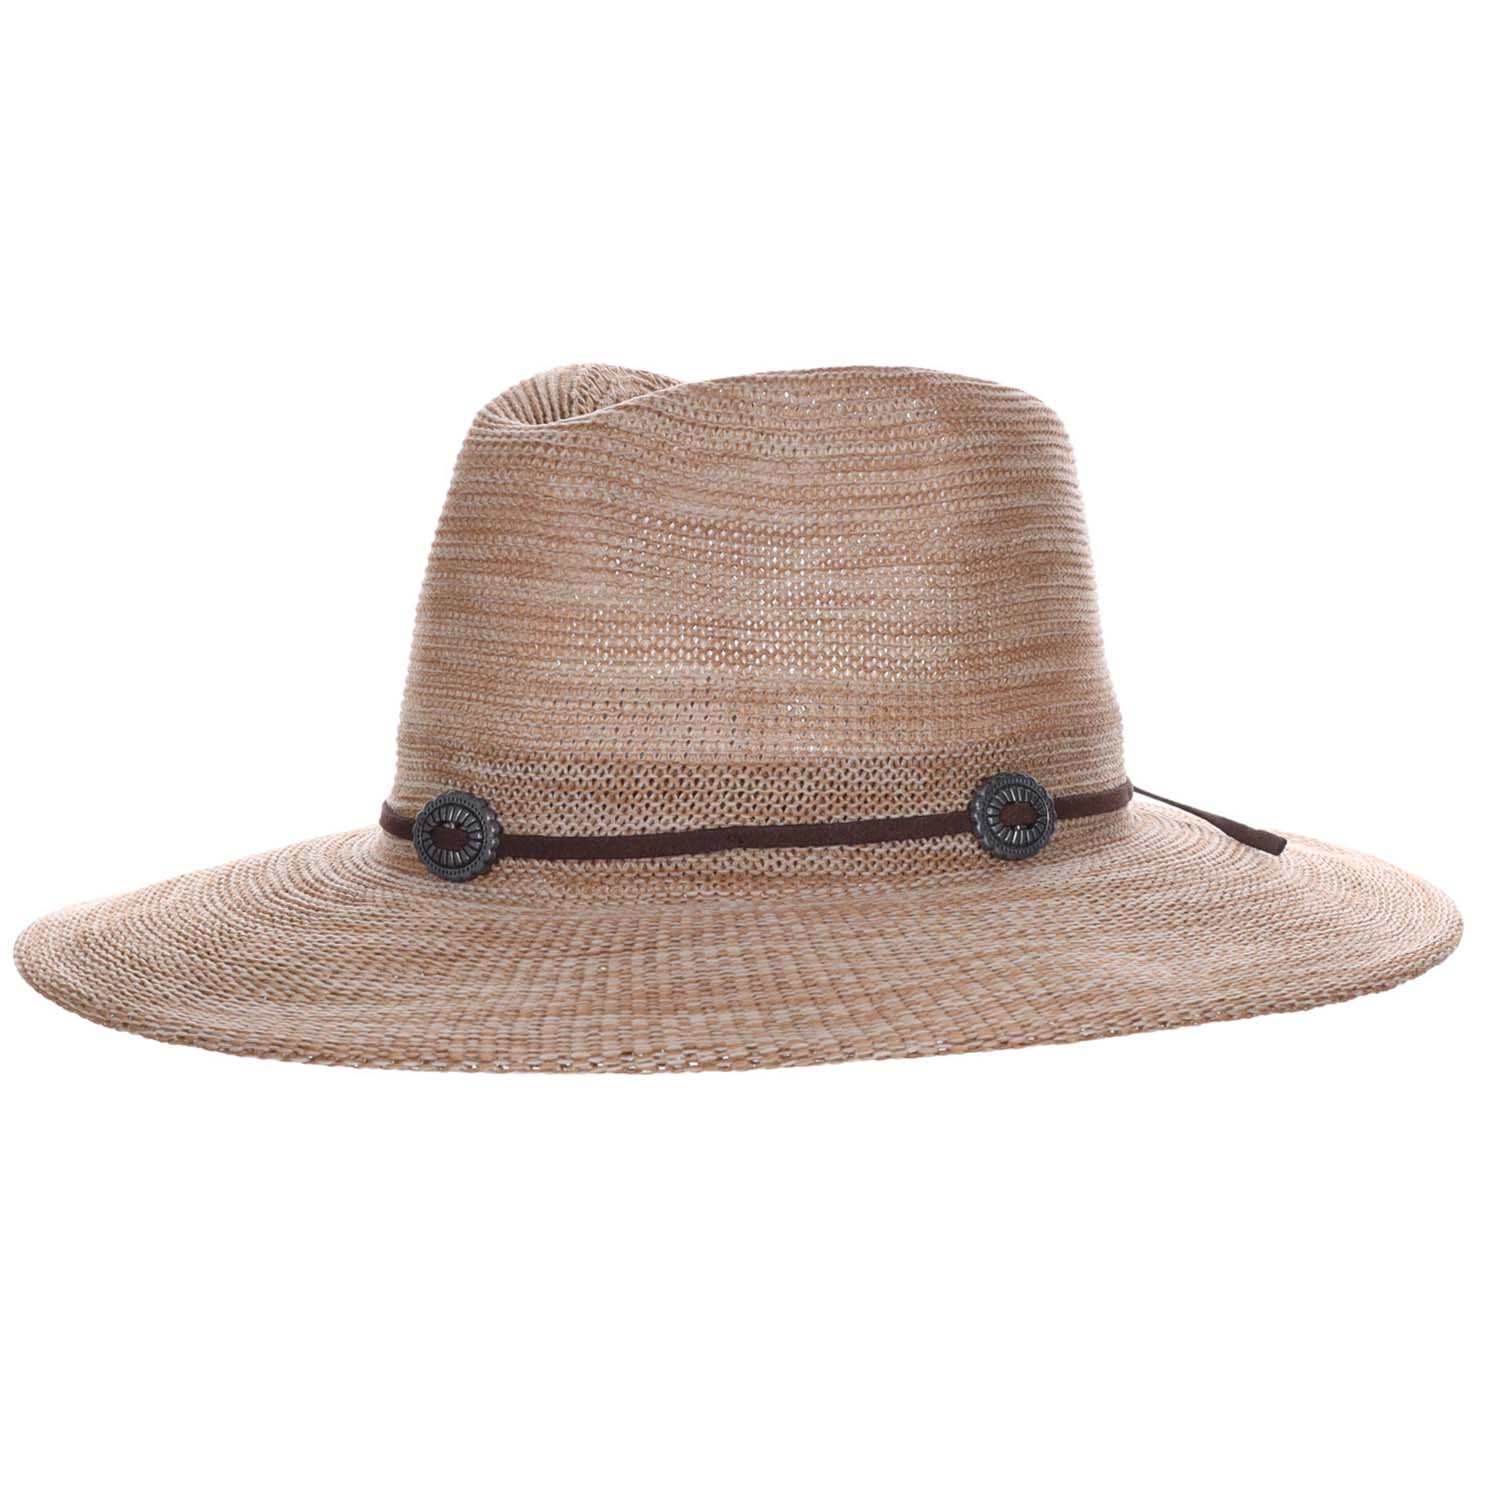 Space Dyed Knit Safari Hat with Conchos - Scala Pronto Safari Hat Scala Hats LW801-CAMEL Camel  